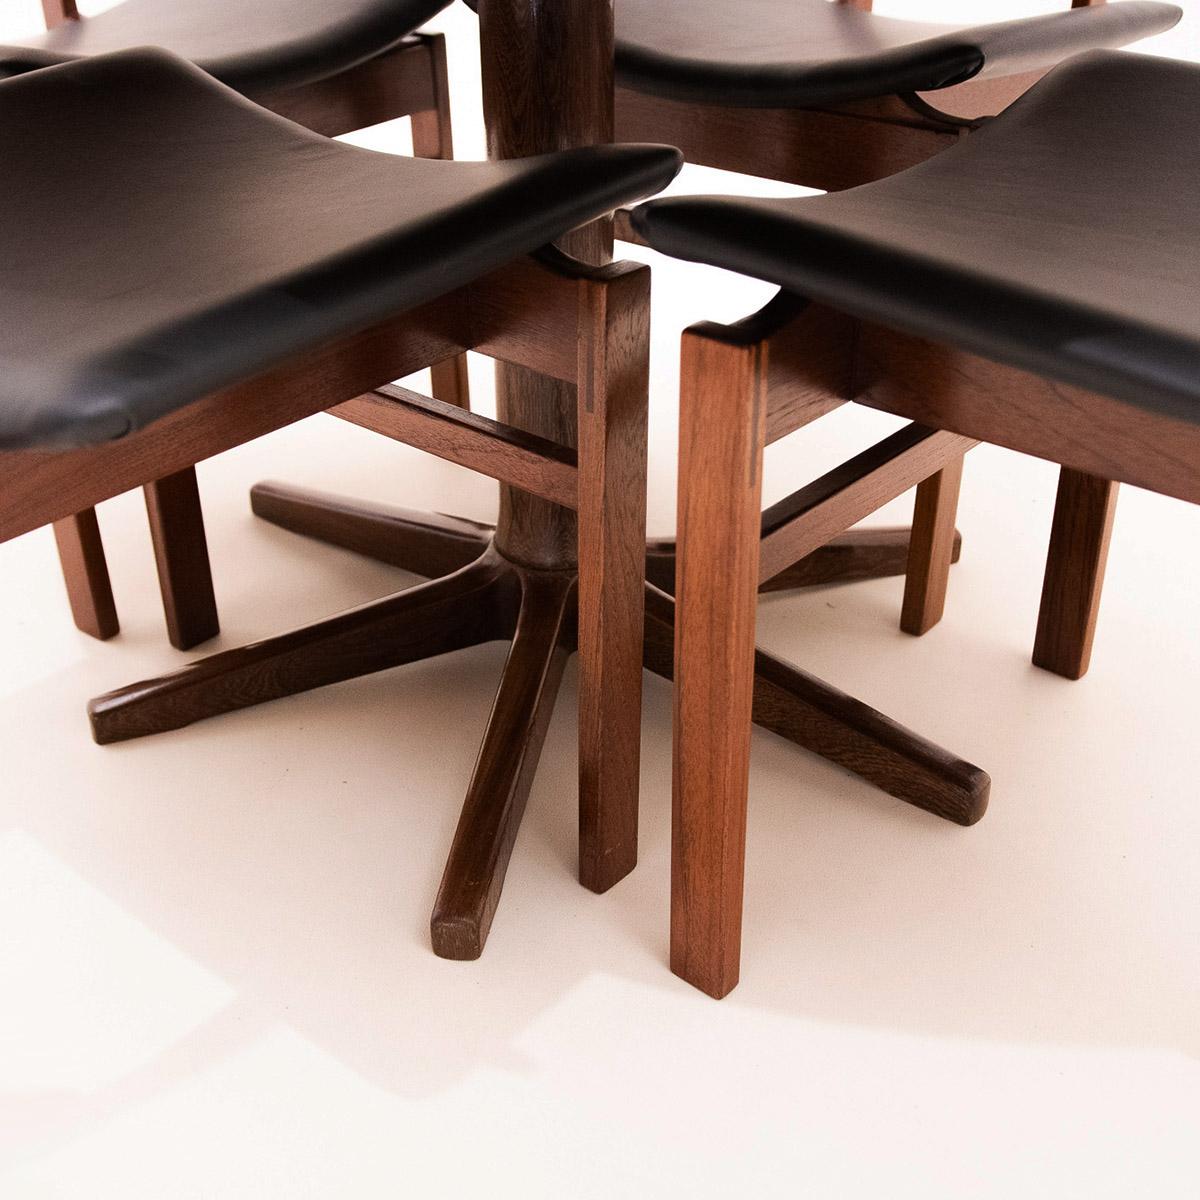 20th Century Danish Mid-Century Modern Dining Set with 6 Chairs and Extending Dining Table